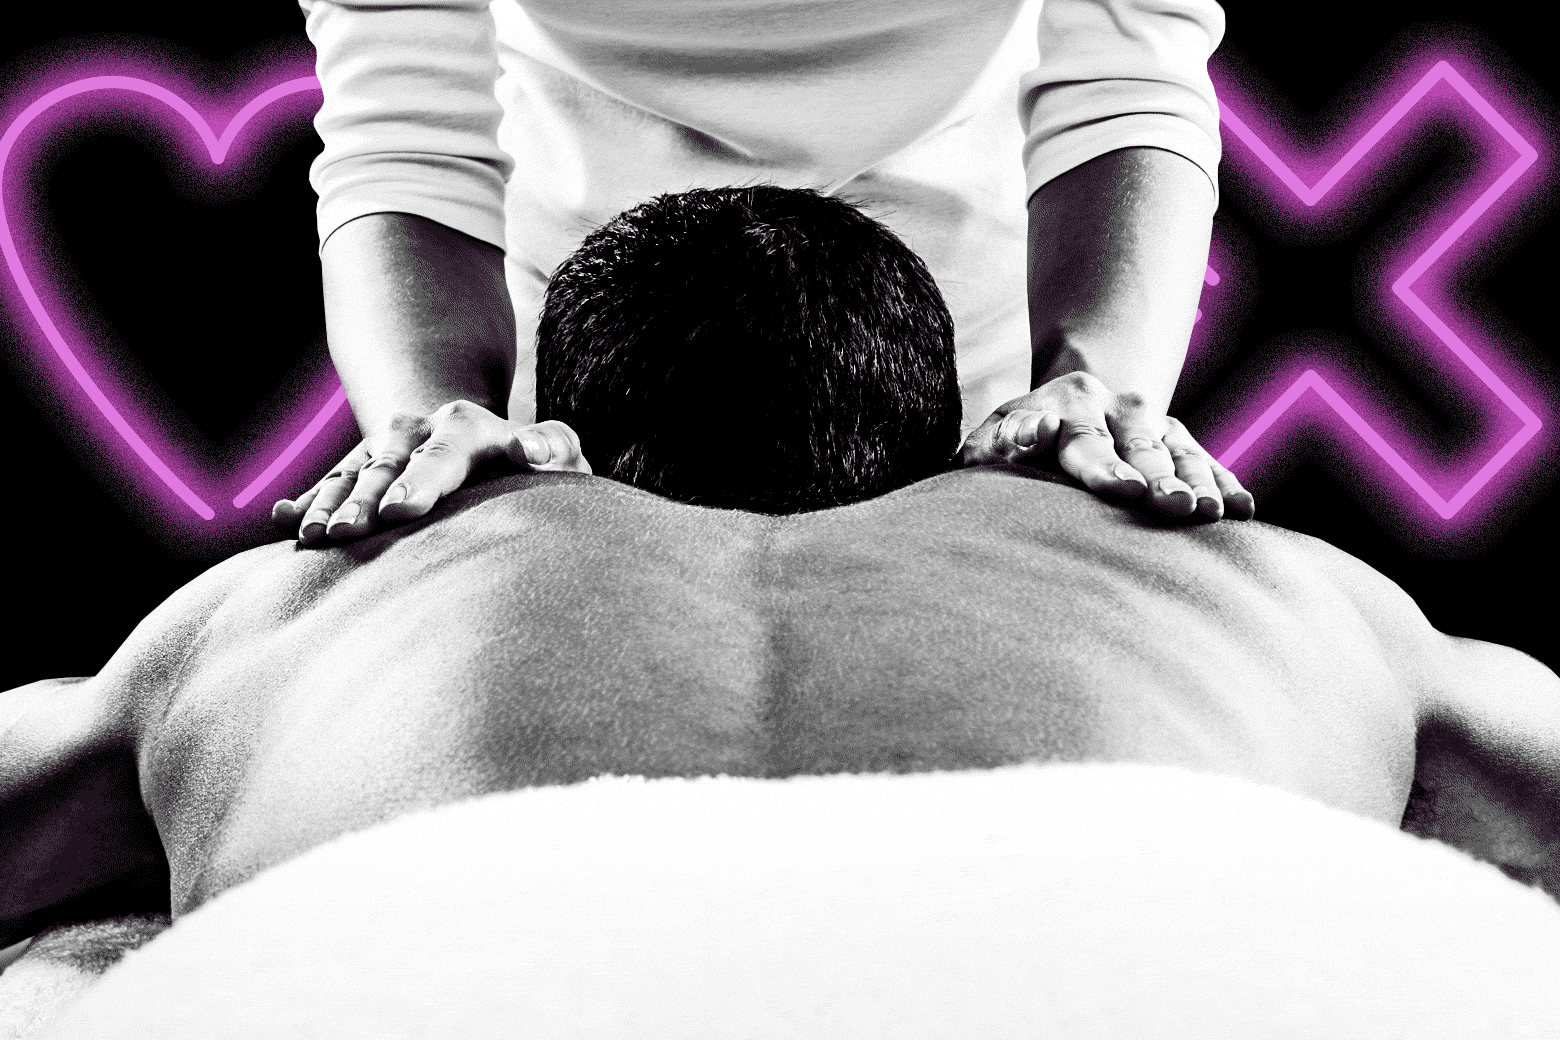 The S. recommend best of body massage leads strong female orgasm